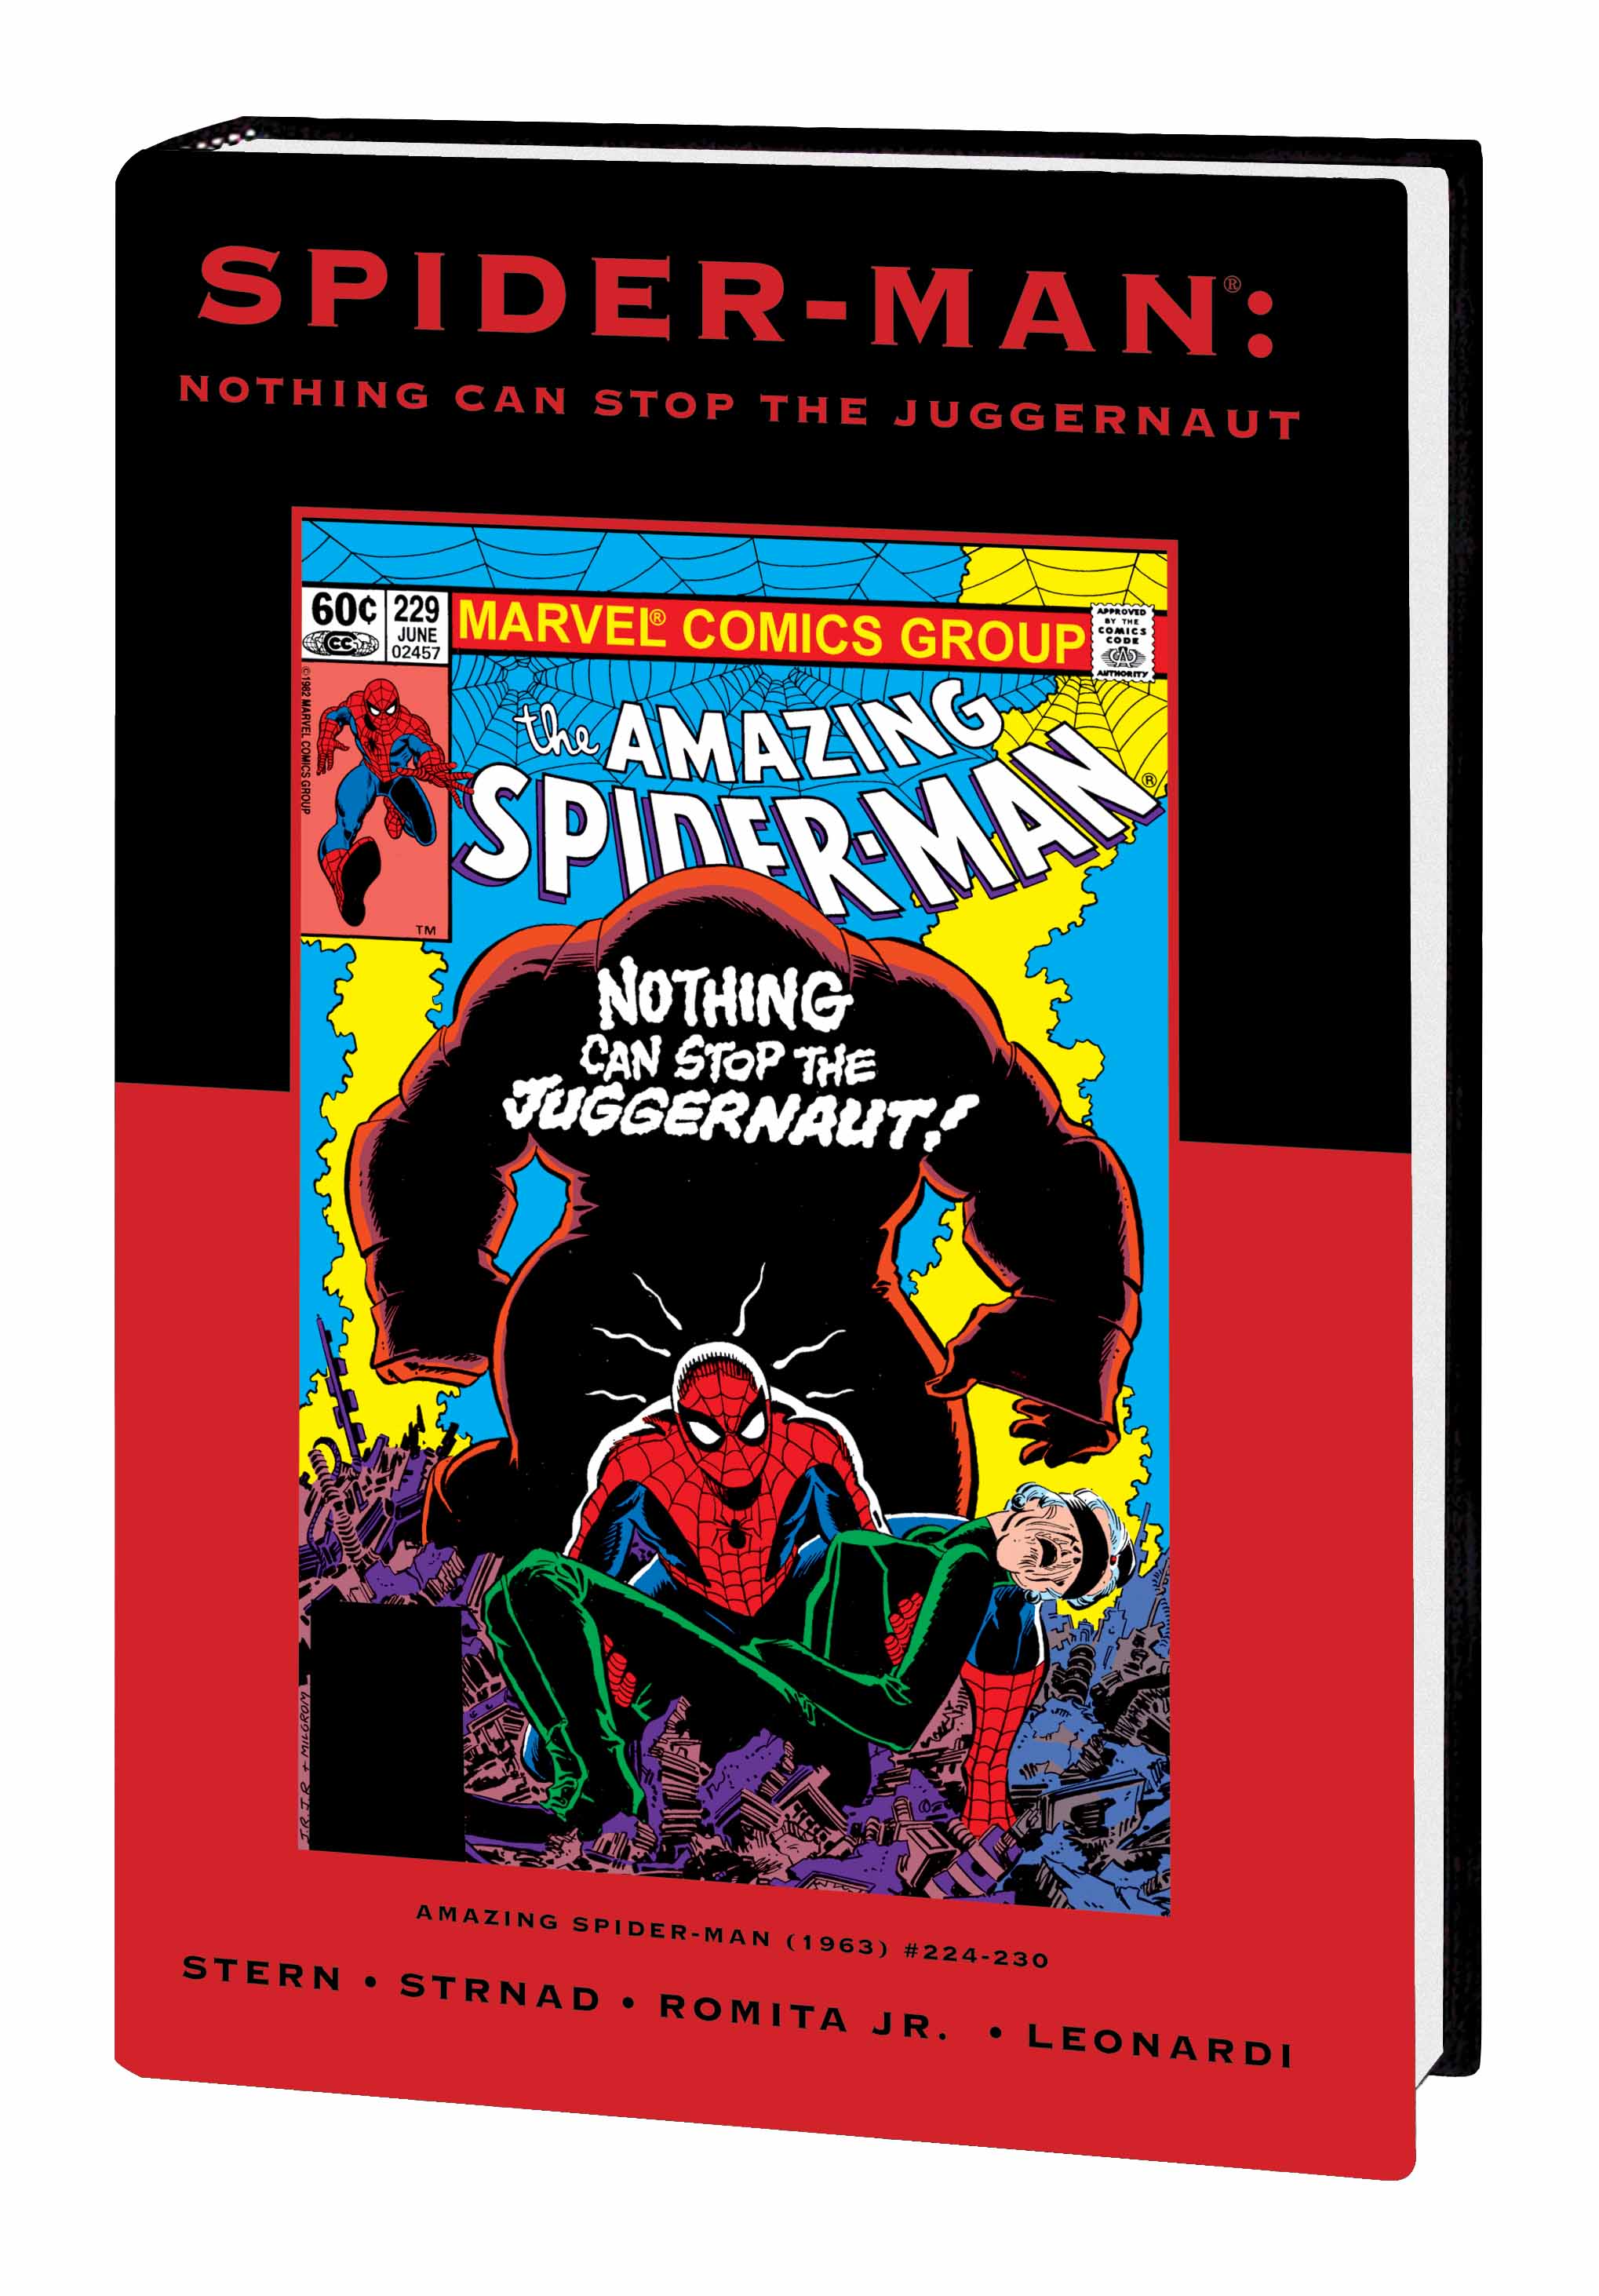 SPIDER-MAN: NOTHING CAN STOP THE JUGGERNAUT (Trade Paperback)